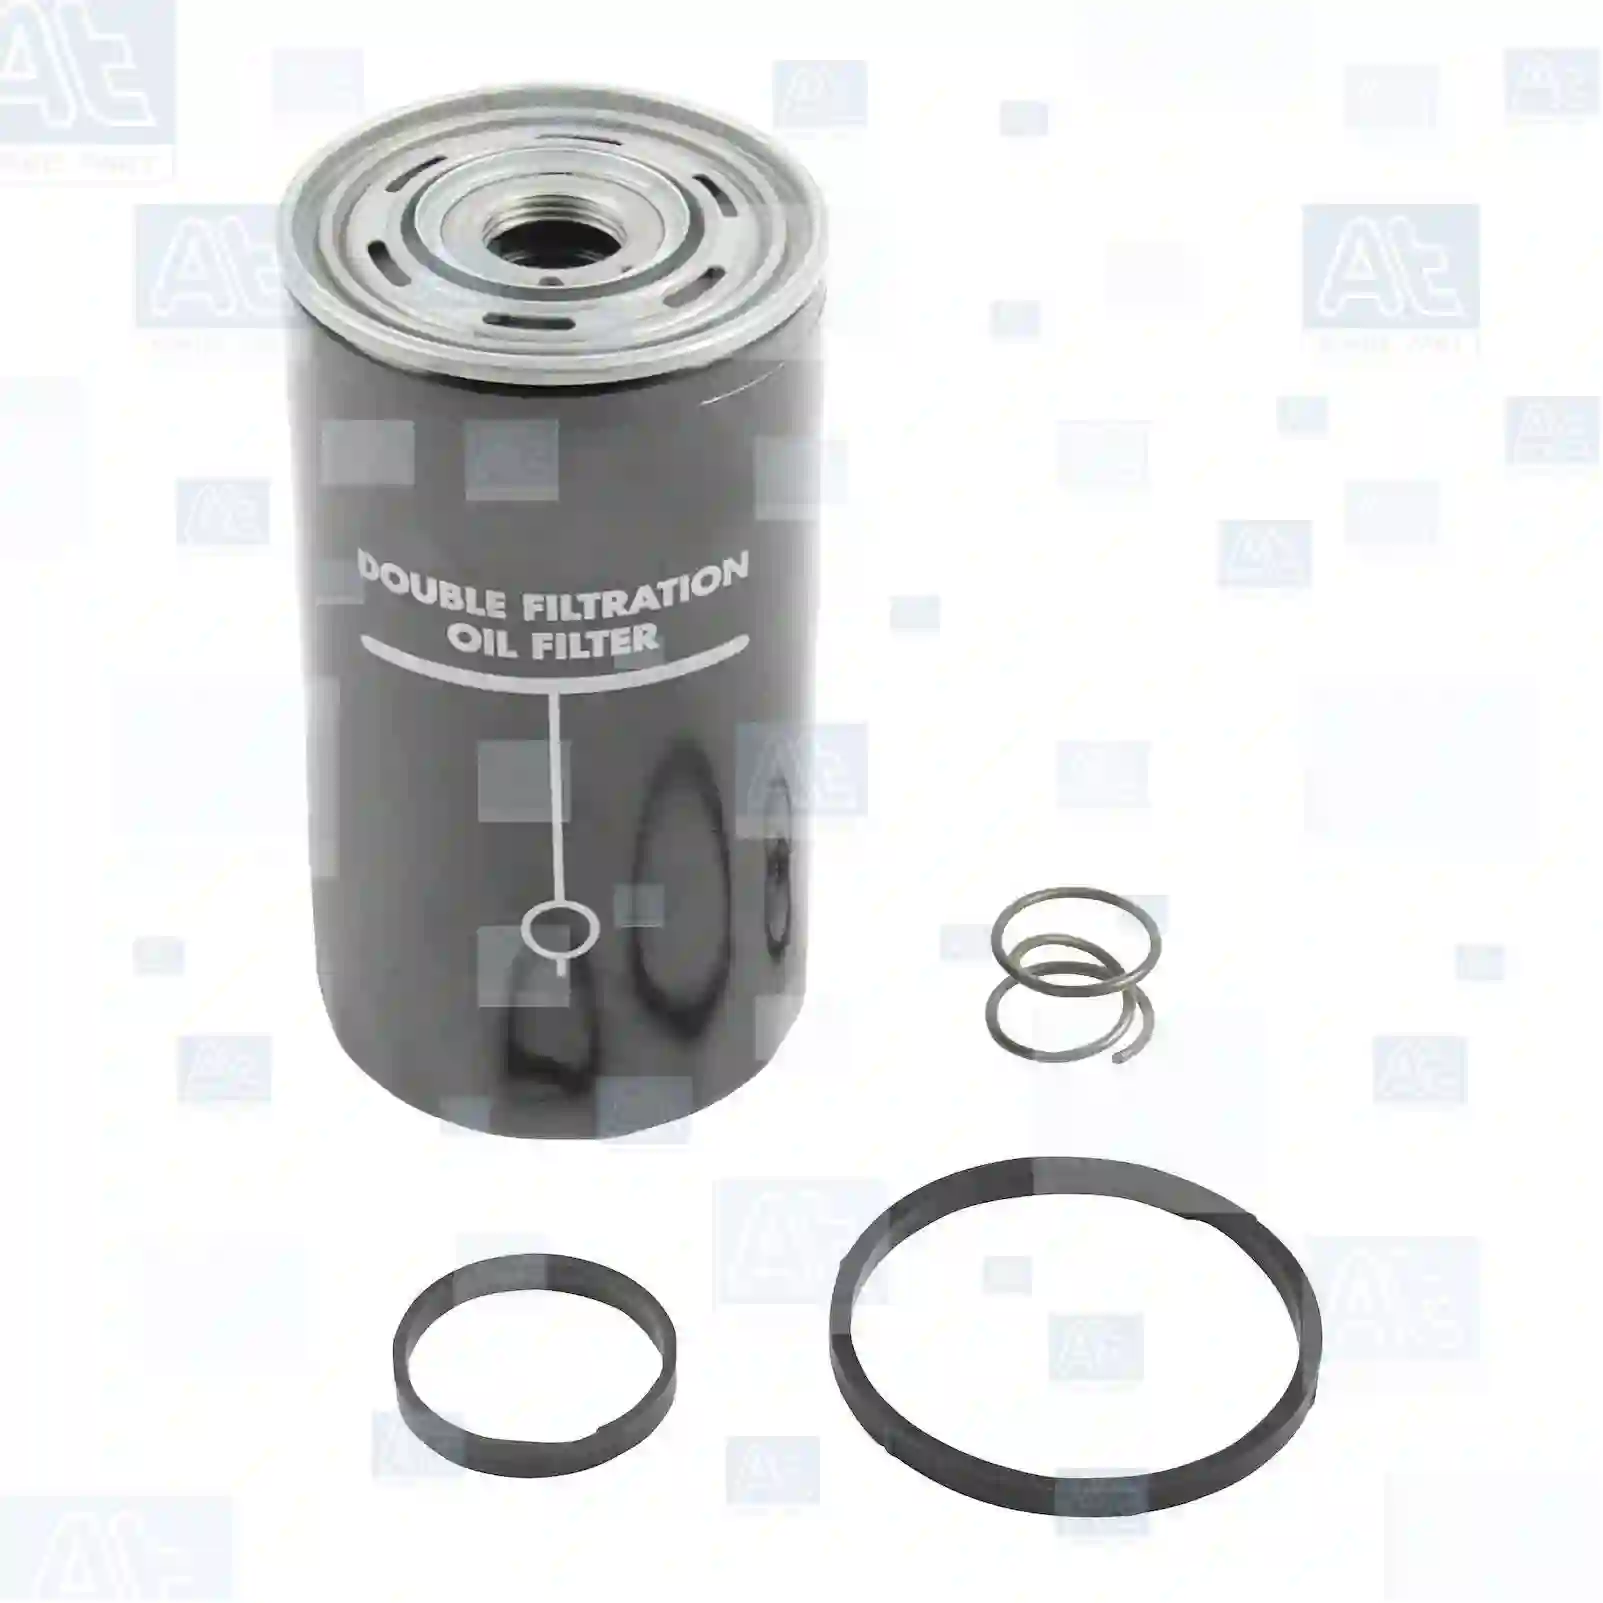 Oil filter, 77702365, 00952715, 1930906, 1931048, 1931048MP, 4787733, 500322702, 01831117, 01902102, 01903629, 01903715, 01907581, 01907584, 01930542, 01930906, 01931048, 04787733, 19309061, 61315398, 61315399, 74787733, 98432653, H220WN, 01902102, 01903629, 01903715, 01907581, 01907584, 01907884, 01930542, 01930906, 01933629, 02997305, 04787733, 1902102, 1903629, 1903715, 1907584, 2997305, 4787733, 500039719, 500040978, 61315398, 61315399, 98432653, 01930906, 01931048, 1931048MP, 500322702, 5001846646, 6005019783, ZG01714-0008 ||  77702365 At Spare Part | Engine, Accelerator Pedal, Camshaft, Connecting Rod, Crankcase, Crankshaft, Cylinder Head, Engine Suspension Mountings, Exhaust Manifold, Exhaust Gas Recirculation, Filter Kits, Flywheel Housing, General Overhaul Kits, Engine, Intake Manifold, Oil Cleaner, Oil Cooler, Oil Filter, Oil Pump, Oil Sump, Piston & Liner, Sensor & Switch, Timing Case, Turbocharger, Cooling System, Belt Tensioner, Coolant Filter, Coolant Pipe, Corrosion Prevention Agent, Drive, Expansion Tank, Fan, Intercooler, Monitors & Gauges, Radiator, Thermostat, V-Belt / Timing belt, Water Pump, Fuel System, Electronical Injector Unit, Feed Pump, Fuel Filter, cpl., Fuel Gauge Sender,  Fuel Line, Fuel Pump, Fuel Tank, Injection Line Kit, Injection Pump, Exhaust System, Clutch & Pedal, Gearbox, Propeller Shaft, Axles, Brake System, Hubs & Wheels, Suspension, Leaf Spring, Universal Parts / Accessories, Steering, Electrical System, Cabin Oil filter, 77702365, 00952715, 1930906, 1931048, 1931048MP, 4787733, 500322702, 01831117, 01902102, 01903629, 01903715, 01907581, 01907584, 01930542, 01930906, 01931048, 04787733, 19309061, 61315398, 61315399, 74787733, 98432653, H220WN, 01902102, 01903629, 01903715, 01907581, 01907584, 01907884, 01930542, 01930906, 01933629, 02997305, 04787733, 1902102, 1903629, 1903715, 1907584, 2997305, 4787733, 500039719, 500040978, 61315398, 61315399, 98432653, 01930906, 01931048, 1931048MP, 500322702, 5001846646, 6005019783, ZG01714-0008 ||  77702365 At Spare Part | Engine, Accelerator Pedal, Camshaft, Connecting Rod, Crankcase, Crankshaft, Cylinder Head, Engine Suspension Mountings, Exhaust Manifold, Exhaust Gas Recirculation, Filter Kits, Flywheel Housing, General Overhaul Kits, Engine, Intake Manifold, Oil Cleaner, Oil Cooler, Oil Filter, Oil Pump, Oil Sump, Piston & Liner, Sensor & Switch, Timing Case, Turbocharger, Cooling System, Belt Tensioner, Coolant Filter, Coolant Pipe, Corrosion Prevention Agent, Drive, Expansion Tank, Fan, Intercooler, Monitors & Gauges, Radiator, Thermostat, V-Belt / Timing belt, Water Pump, Fuel System, Electronical Injector Unit, Feed Pump, Fuel Filter, cpl., Fuel Gauge Sender,  Fuel Line, Fuel Pump, Fuel Tank, Injection Line Kit, Injection Pump, Exhaust System, Clutch & Pedal, Gearbox, Propeller Shaft, Axles, Brake System, Hubs & Wheels, Suspension, Leaf Spring, Universal Parts / Accessories, Steering, Electrical System, Cabin